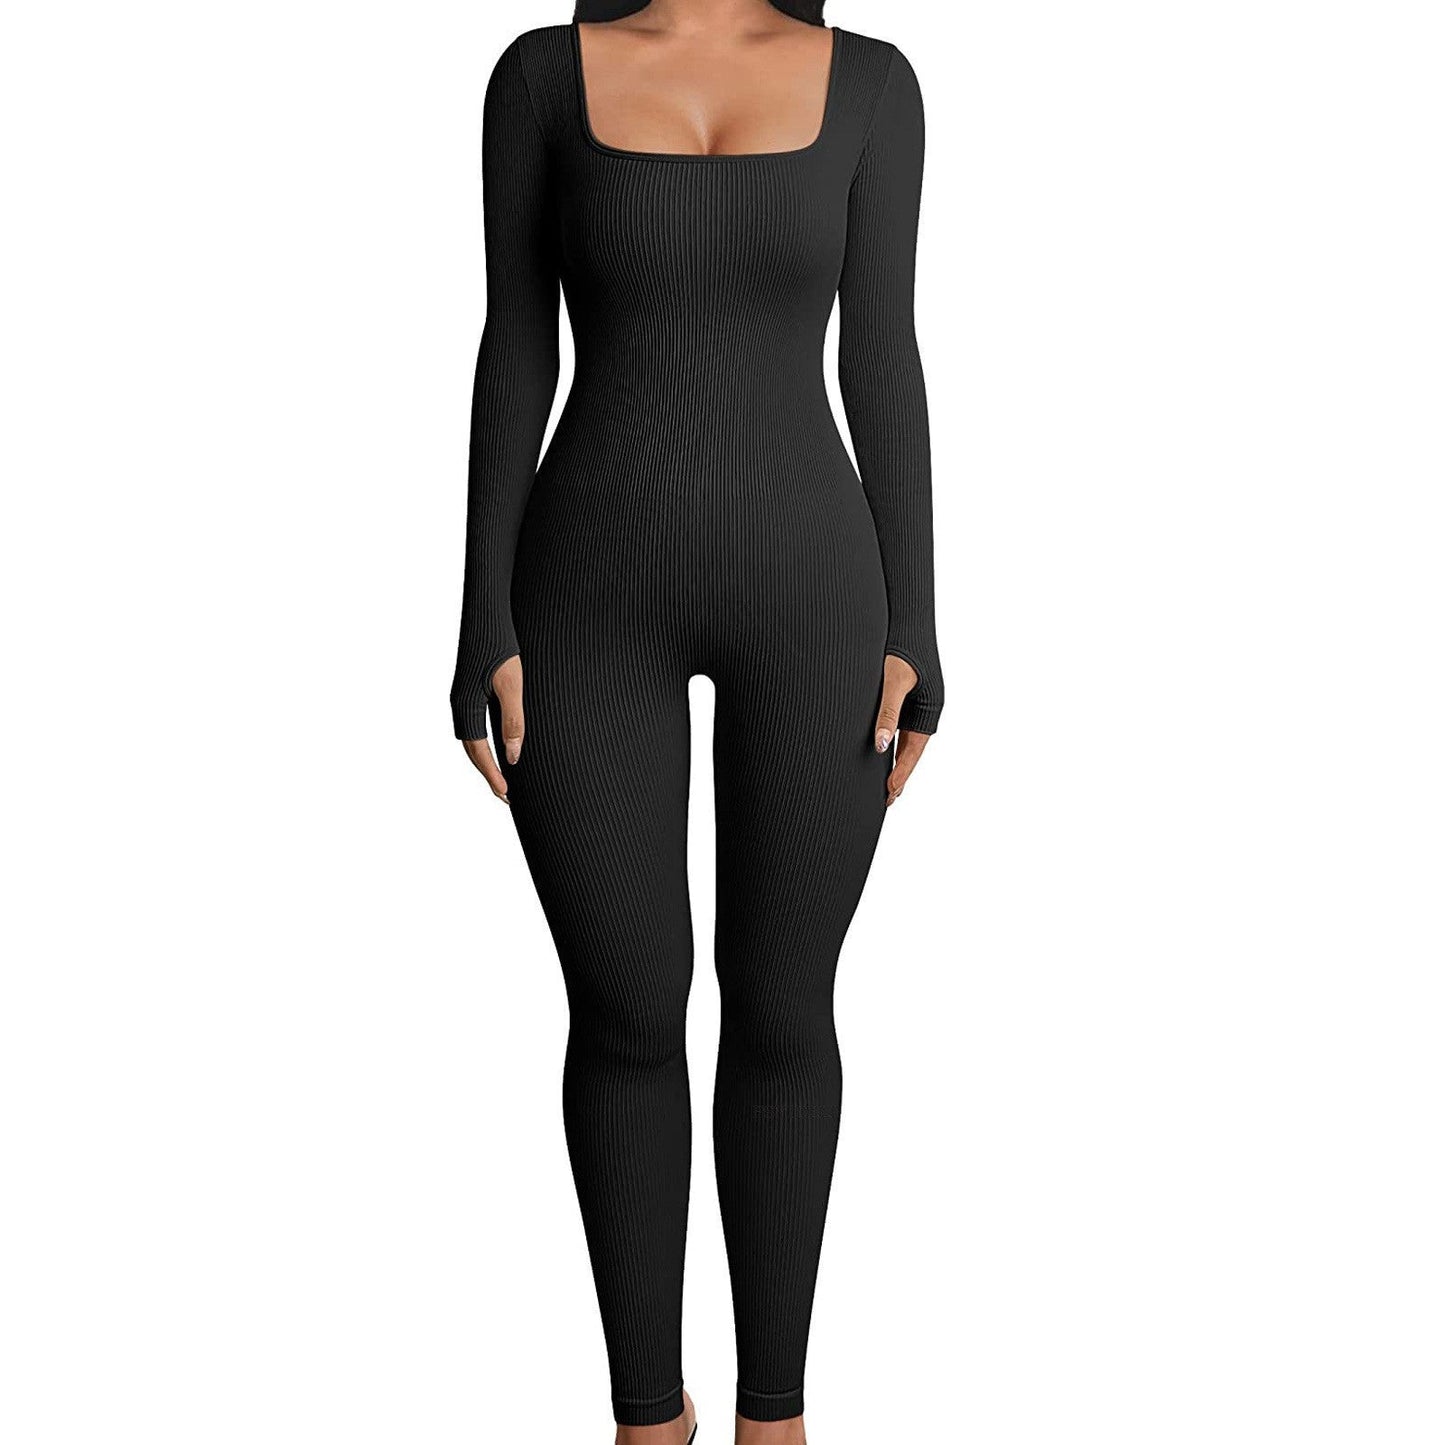 Sexy Long Sleeves Yoga Sports Jumpsuits-Jumpsuits & Rompers-Black-S-Free Shipping Leatheretro